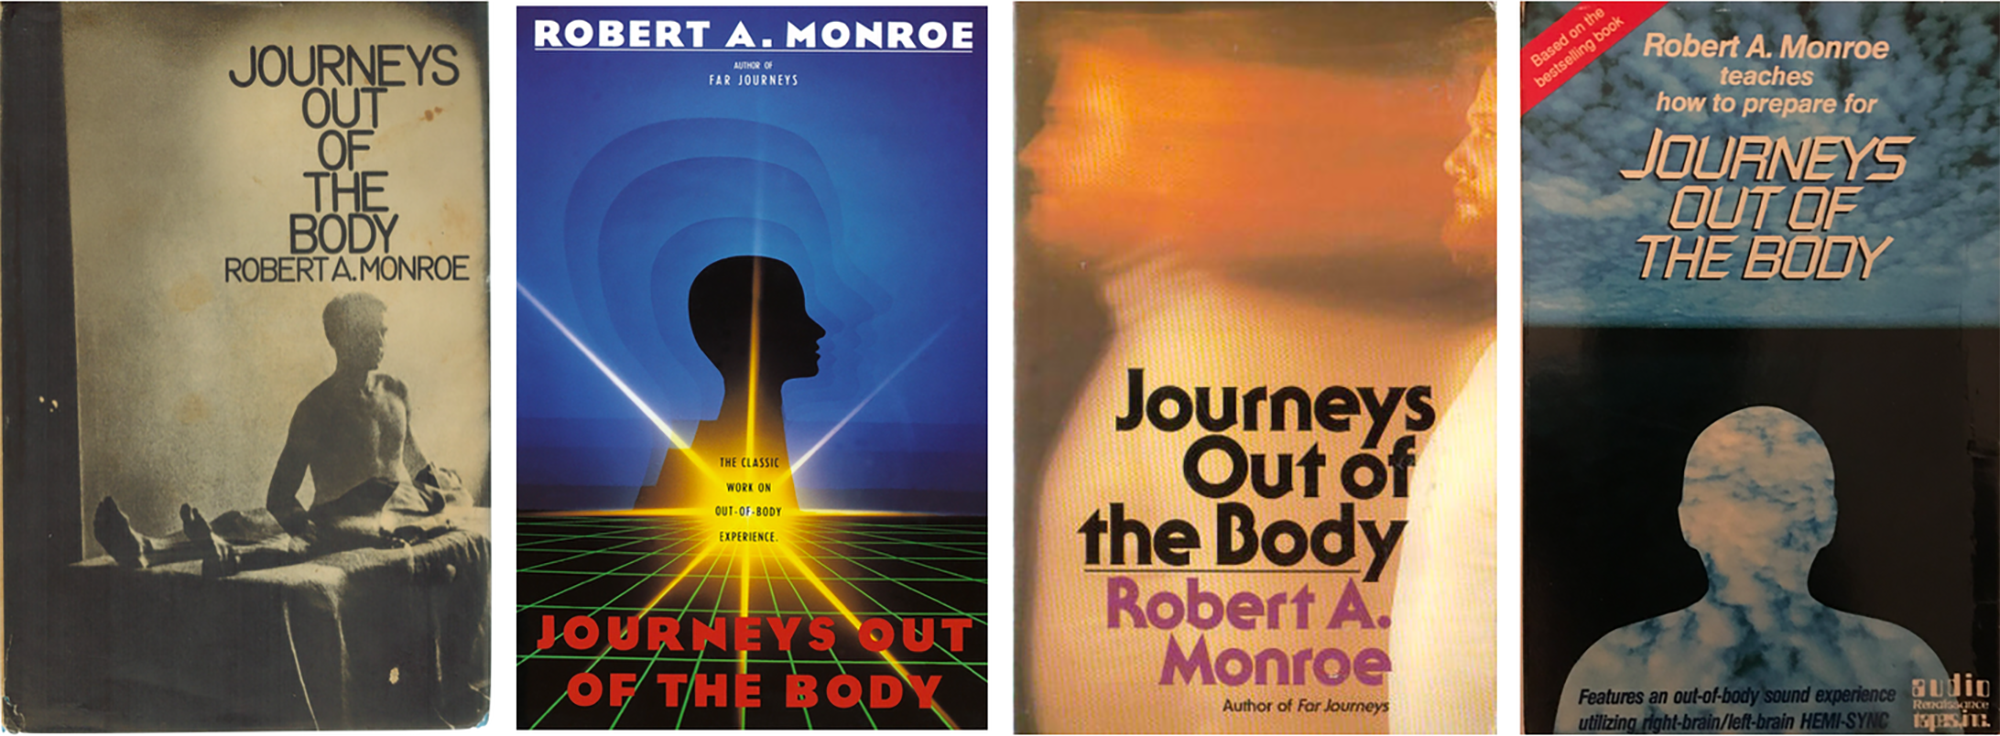 Monroe, Robert a. Journeys out of the body. Far journey